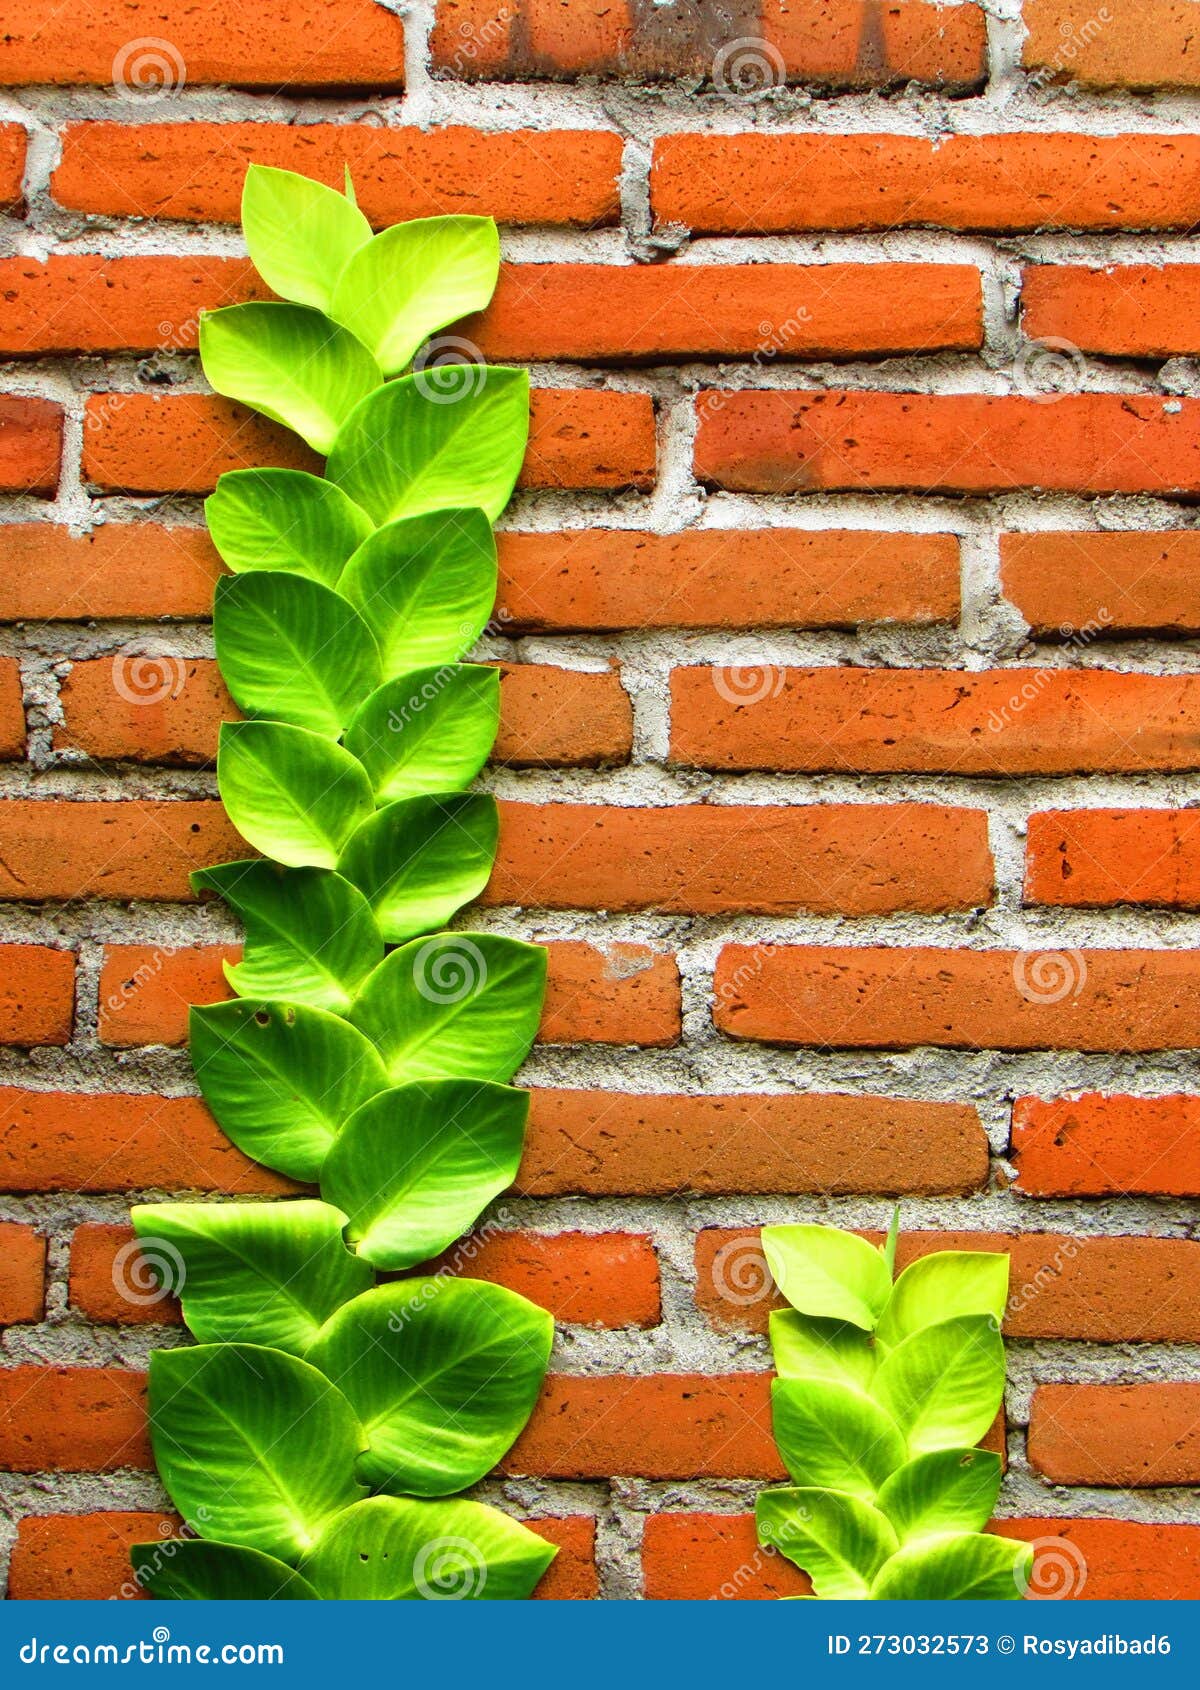 A Brick Wall with Leaves on it and a Brick Wall Stock Image - Image of ...